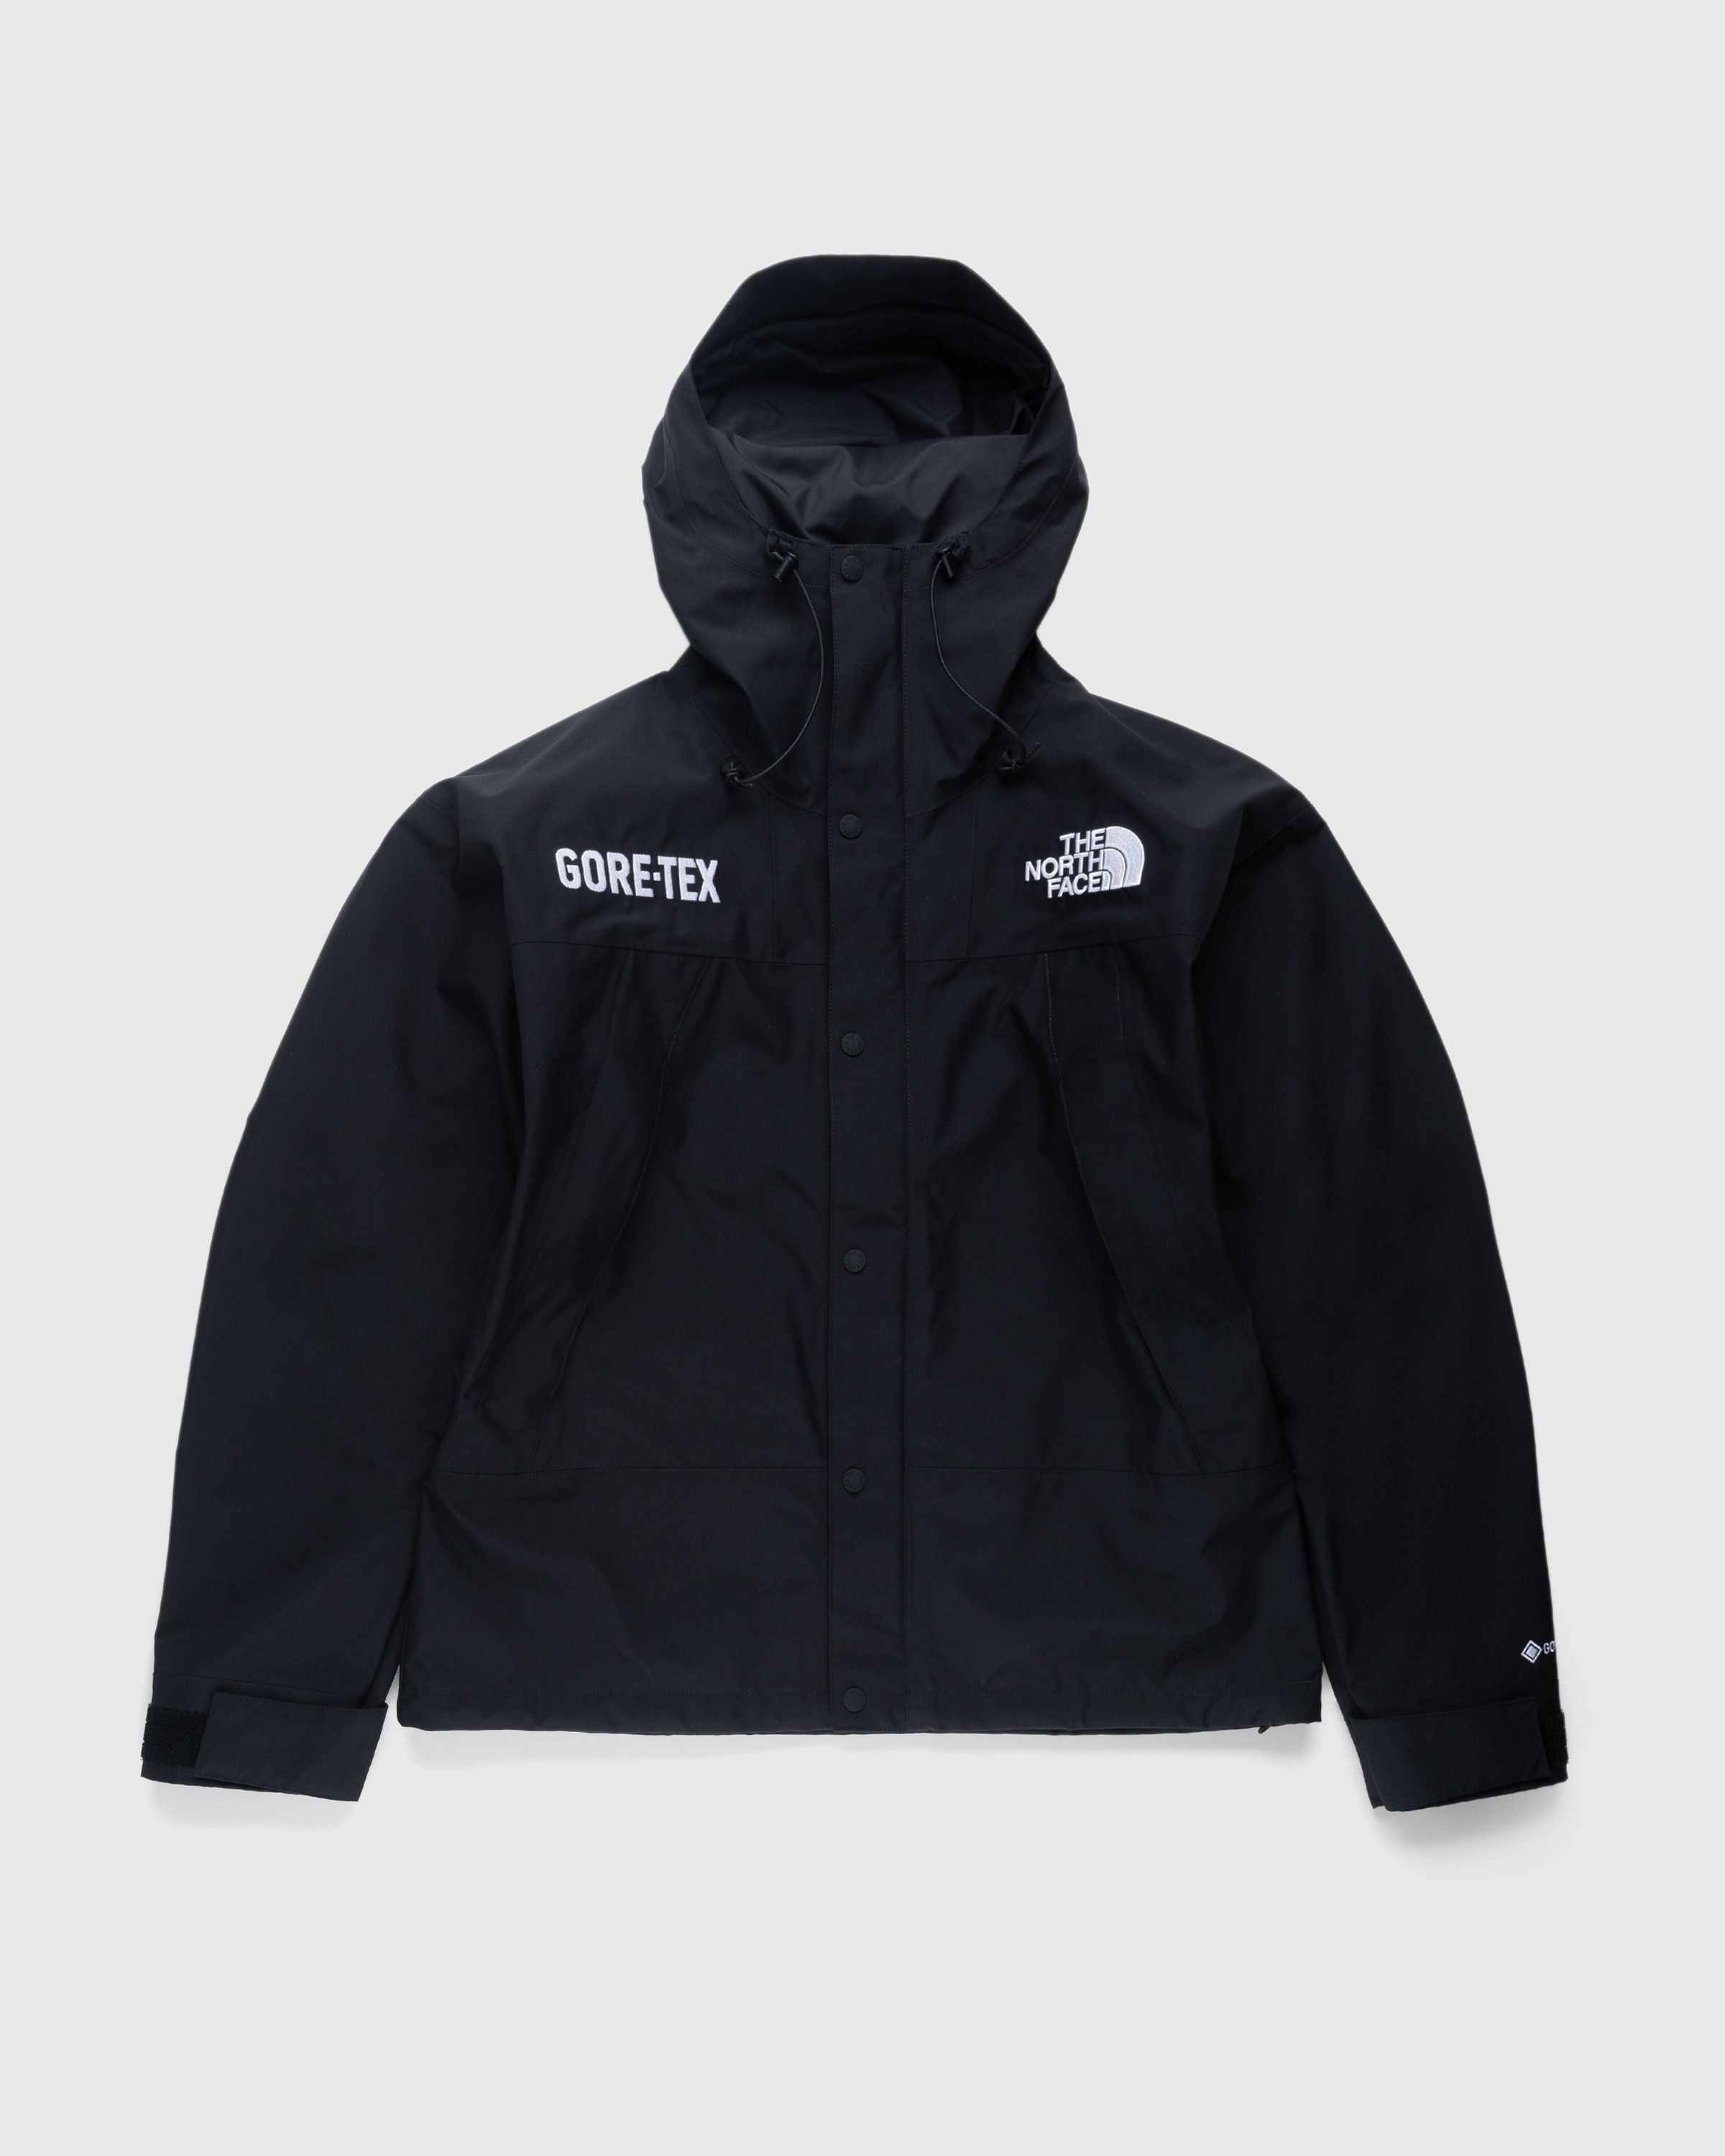 The North Face – GORE-TEX Mountain Jacket TNF Black | Highsnobiety Shop